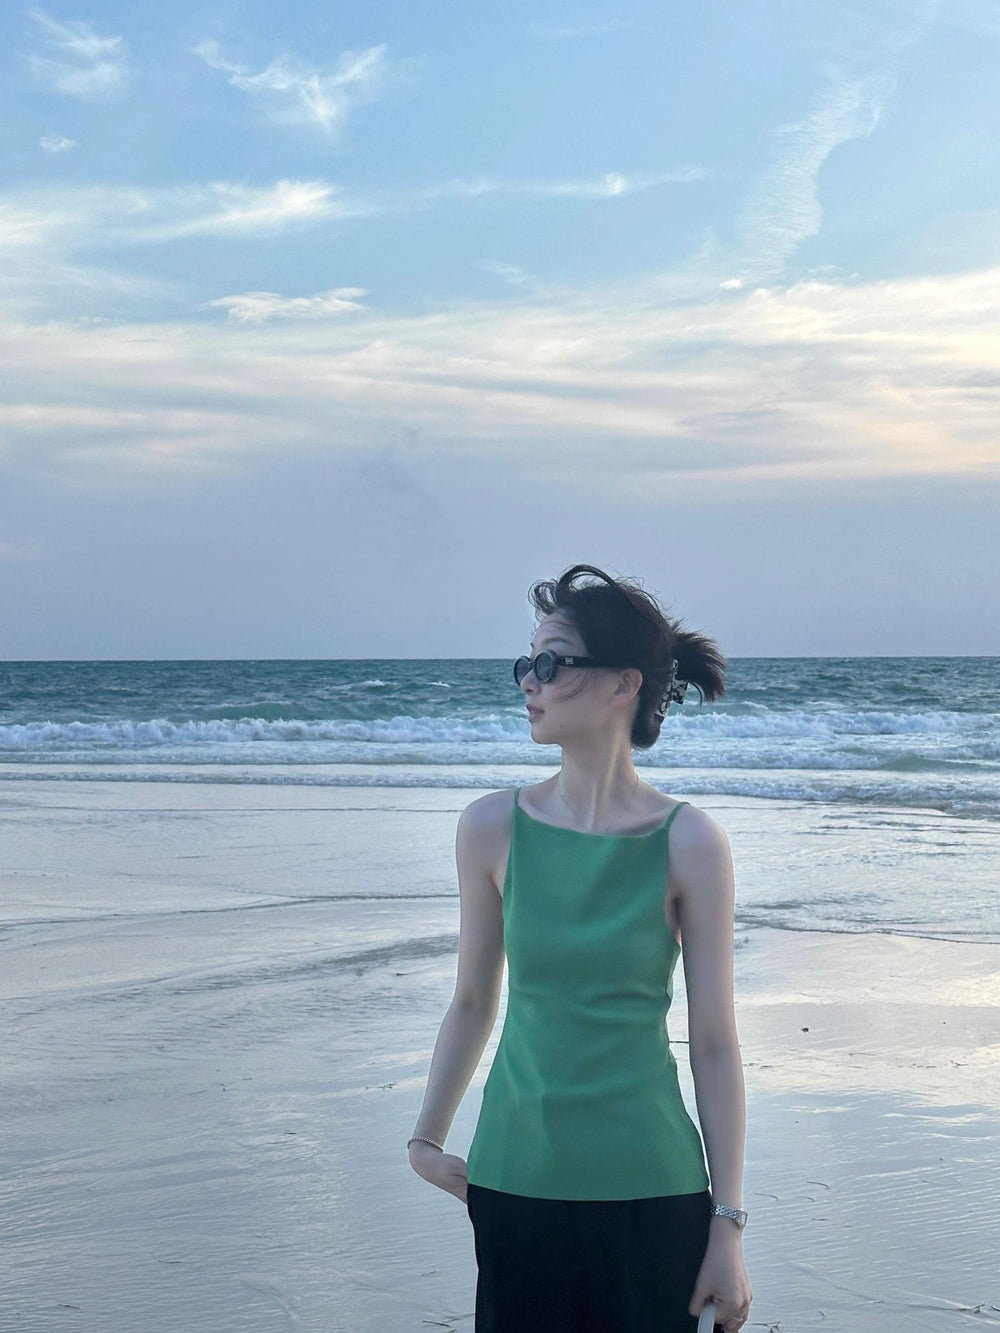 A stylish woman in an elegant green top gracefully poses on the sandy shores of a serene beach wearing her trendy sunglasses.